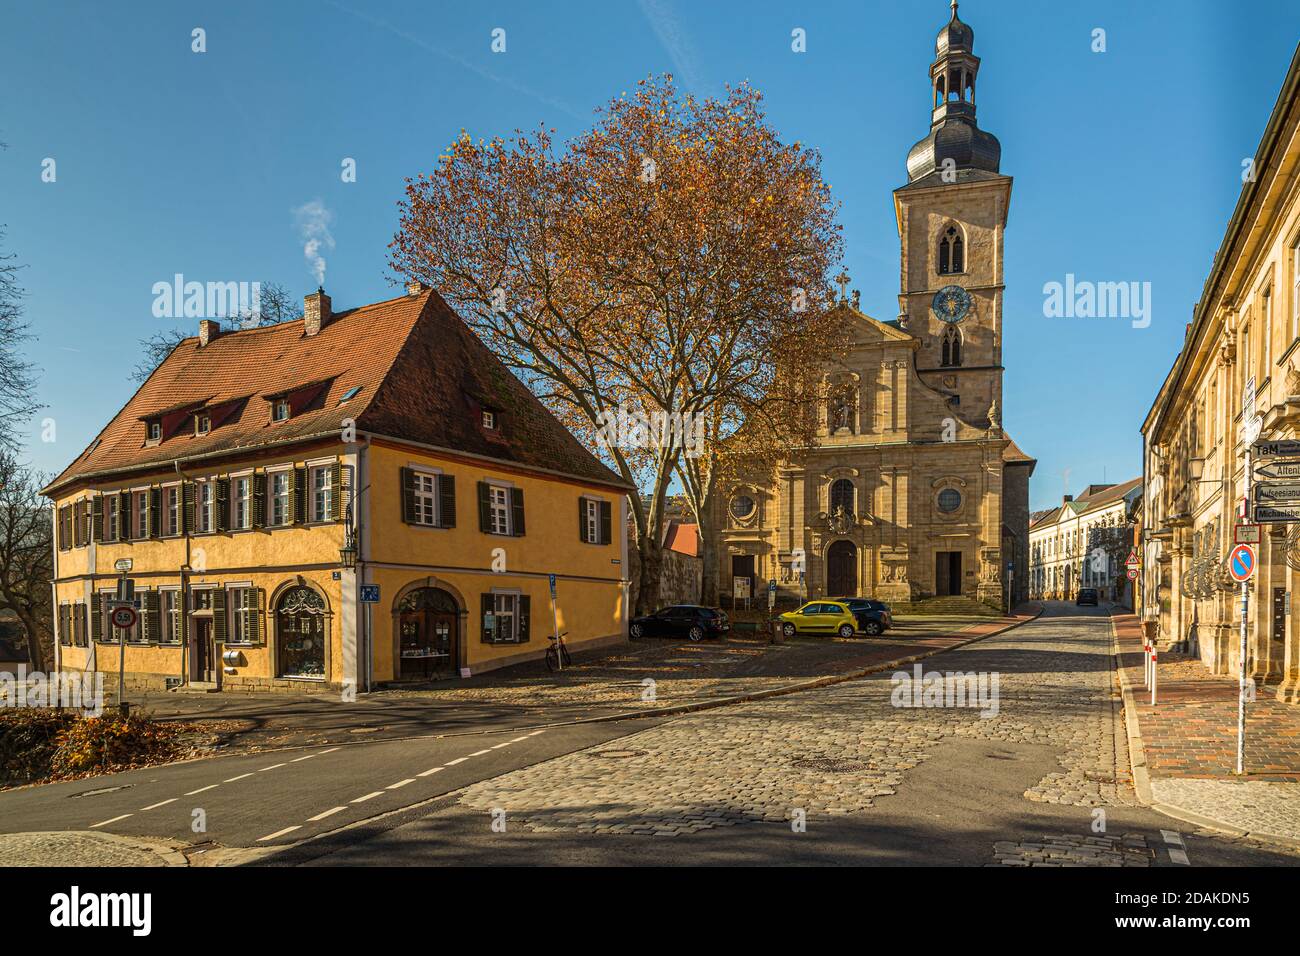 The church St. Jakob in Bamberg dates from the High Middle Ages. On the left the pottery Bamberg, Germany Stock Photo